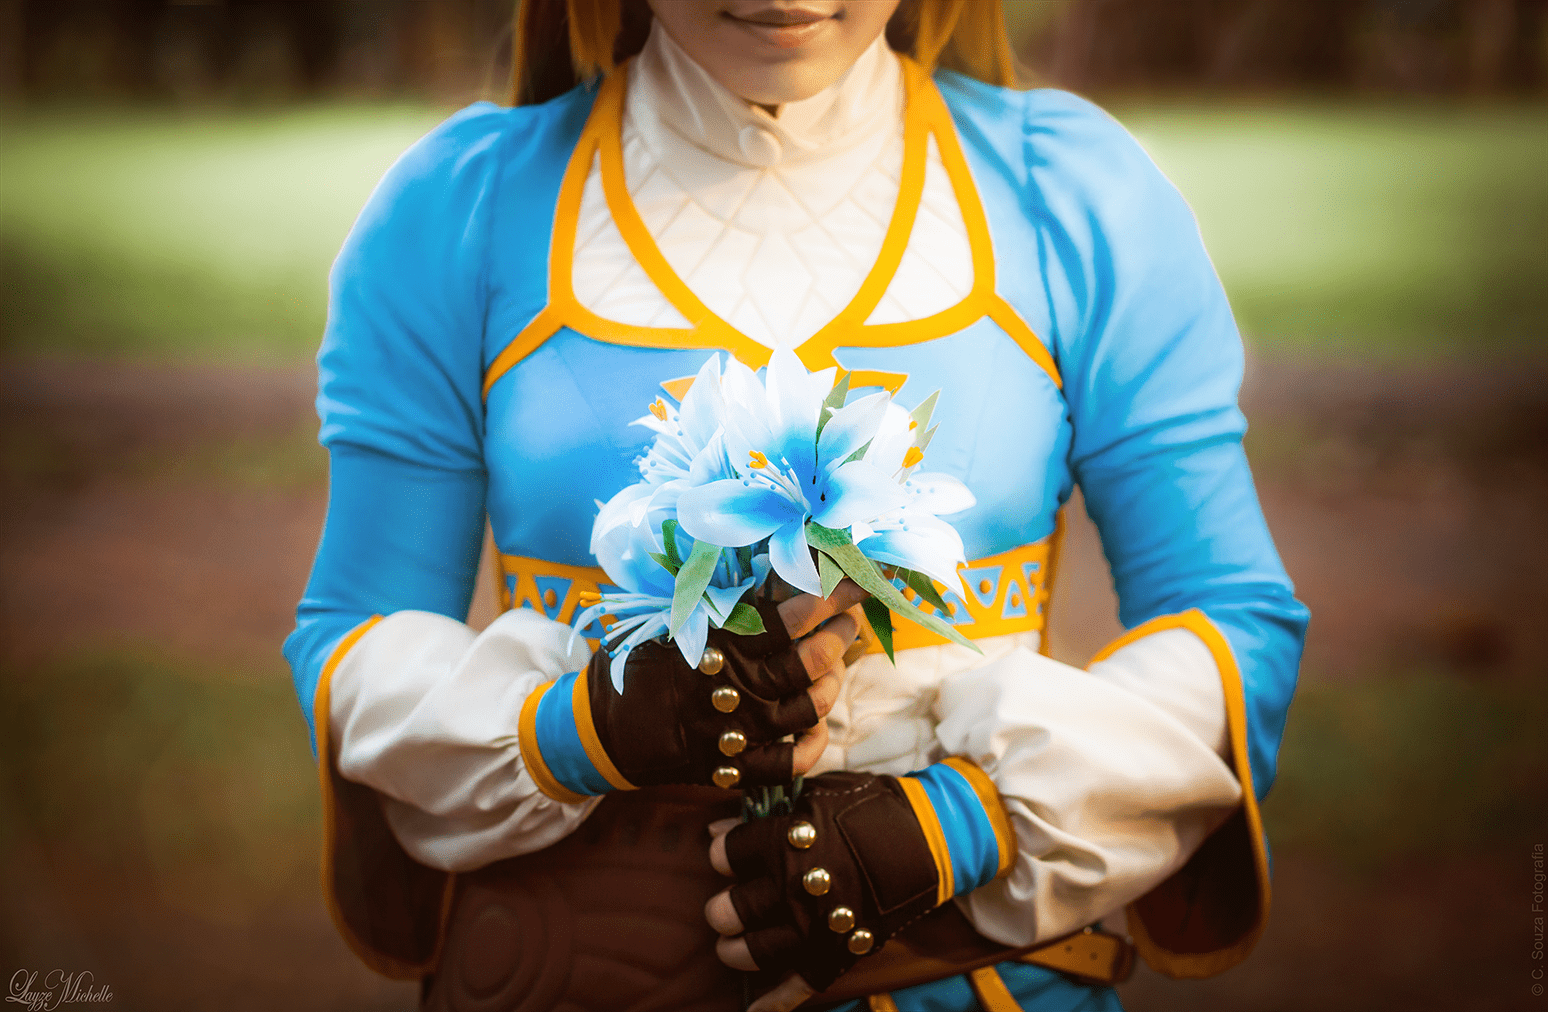 Princess Zelda Cosplay Walked Straight Out Of Breath Of The Wild